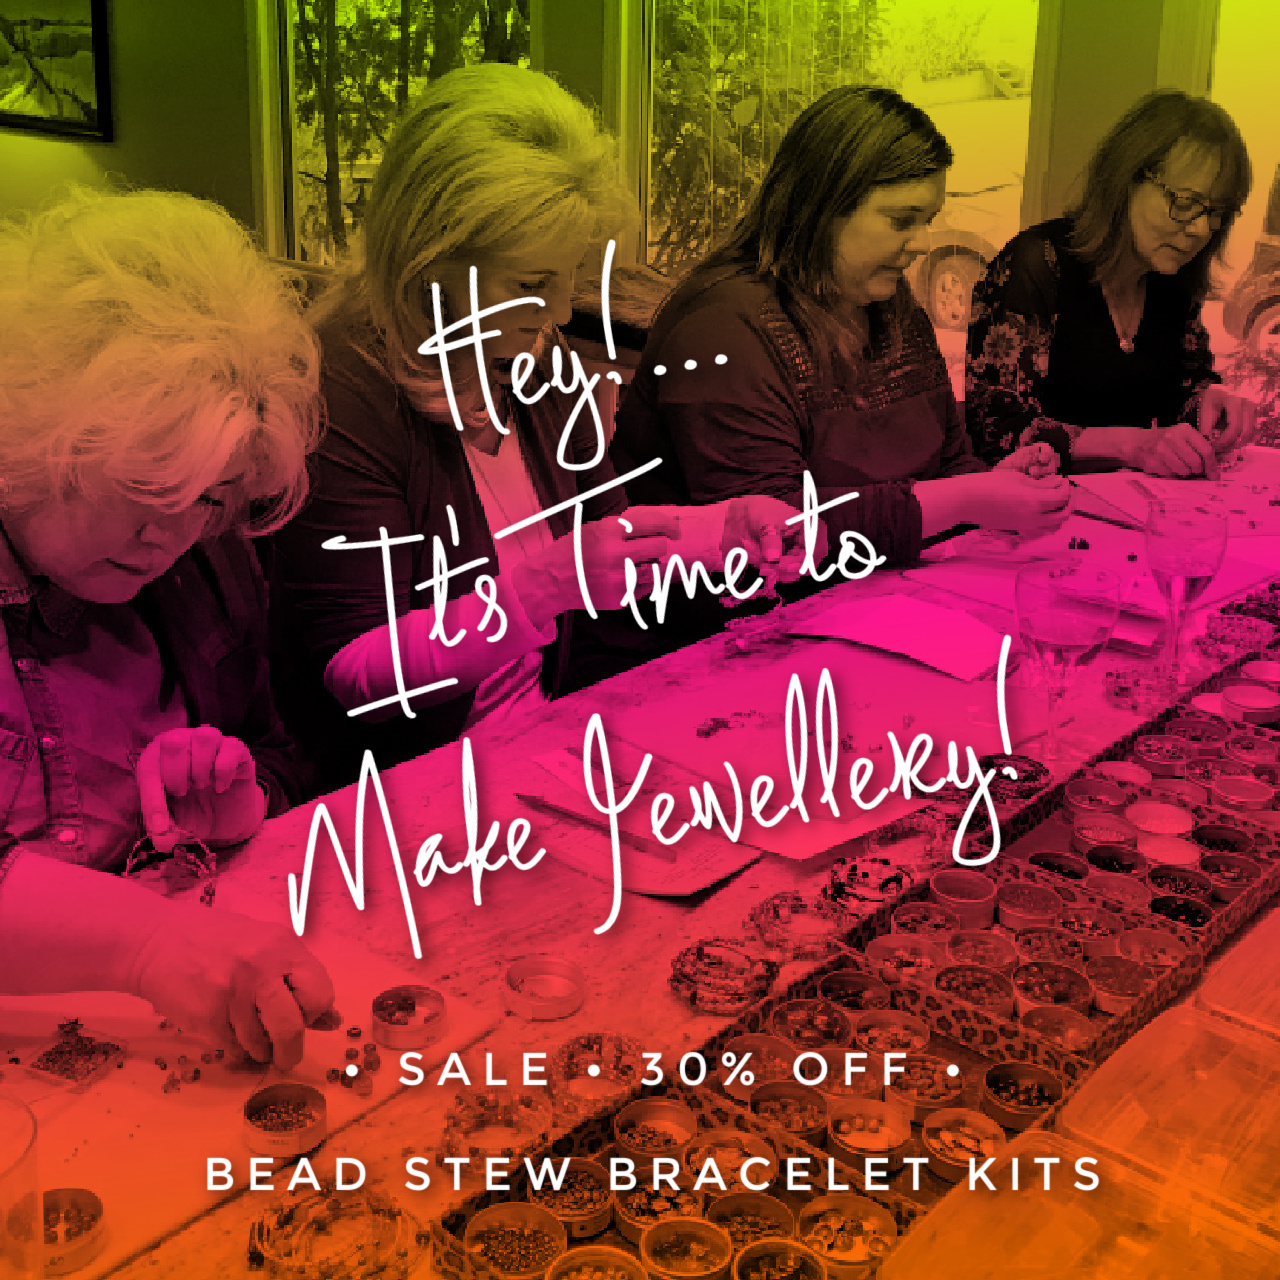 A group of friends making Bead Stew bracelets together for a fun activity.